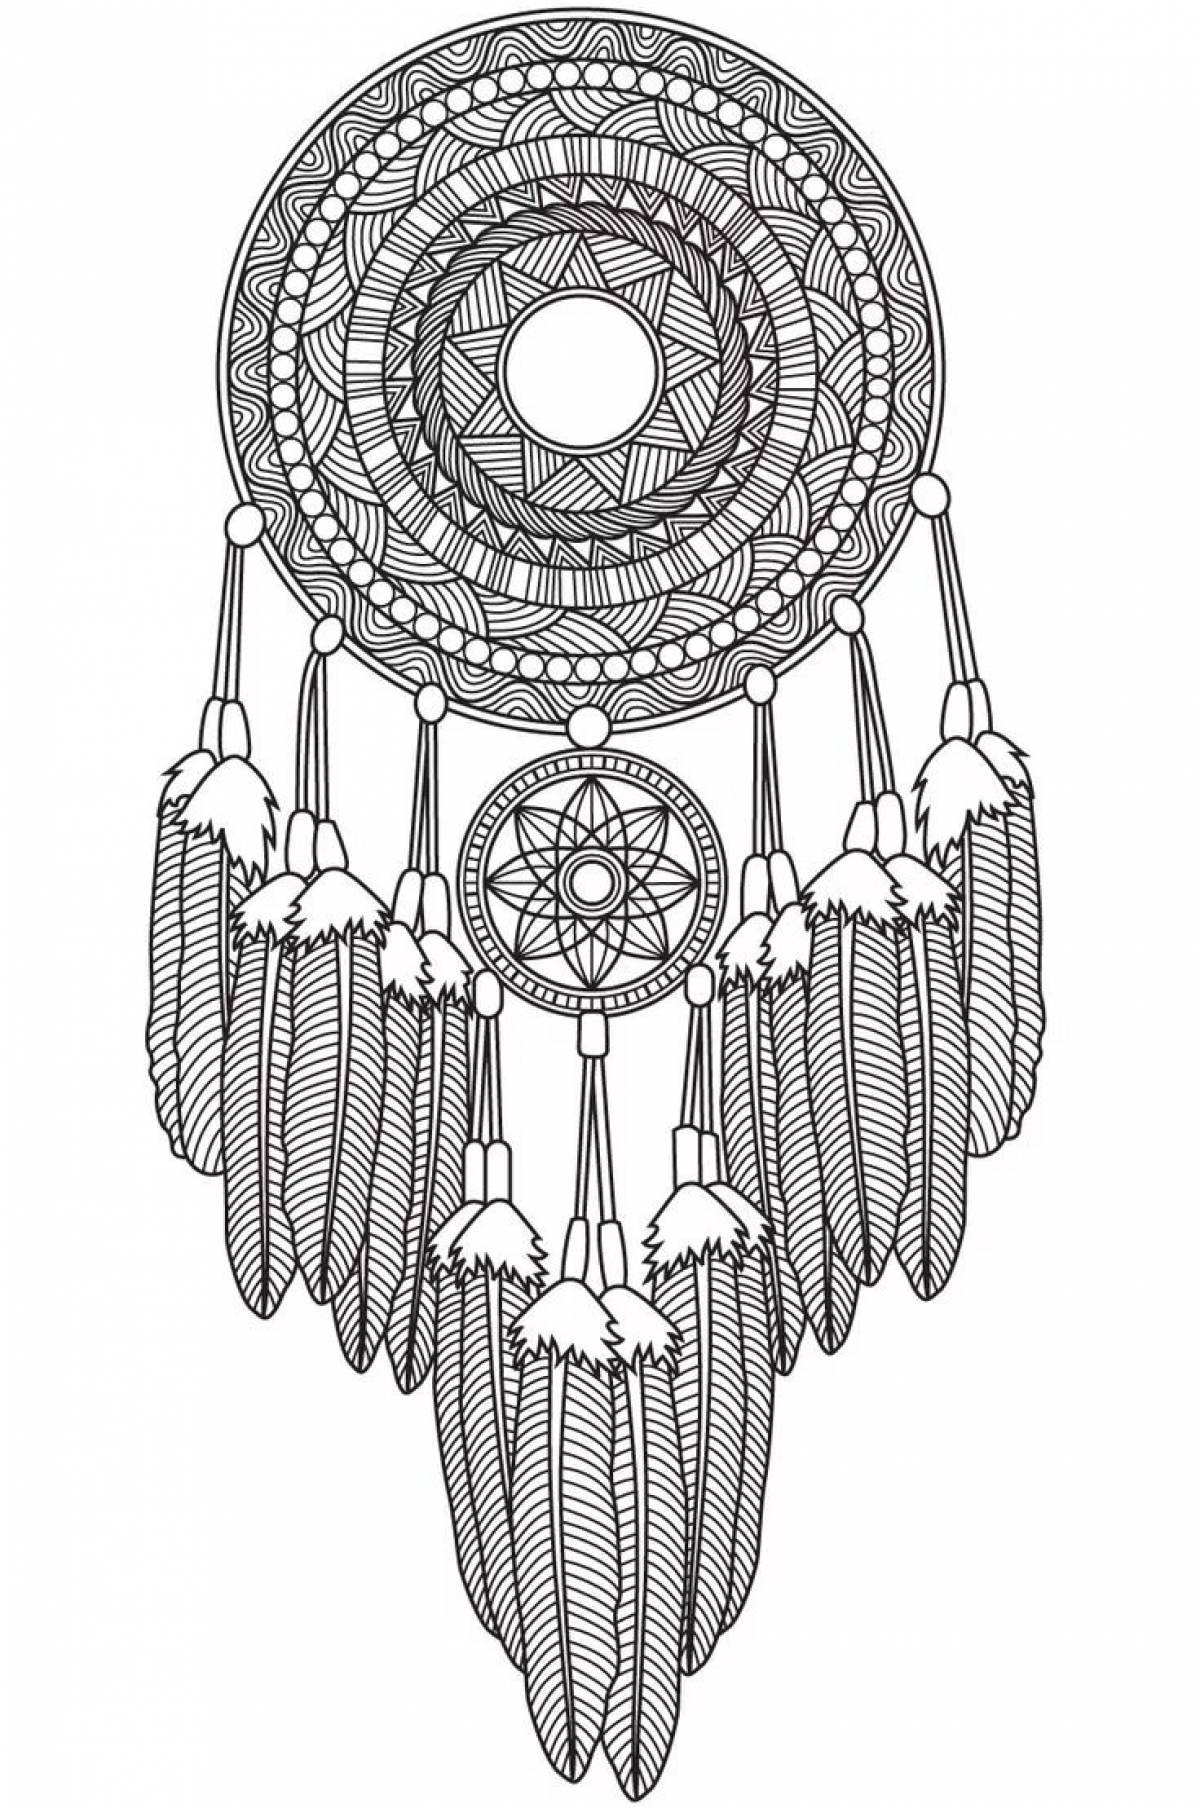 Relaxing coloring book antistress dream catcher